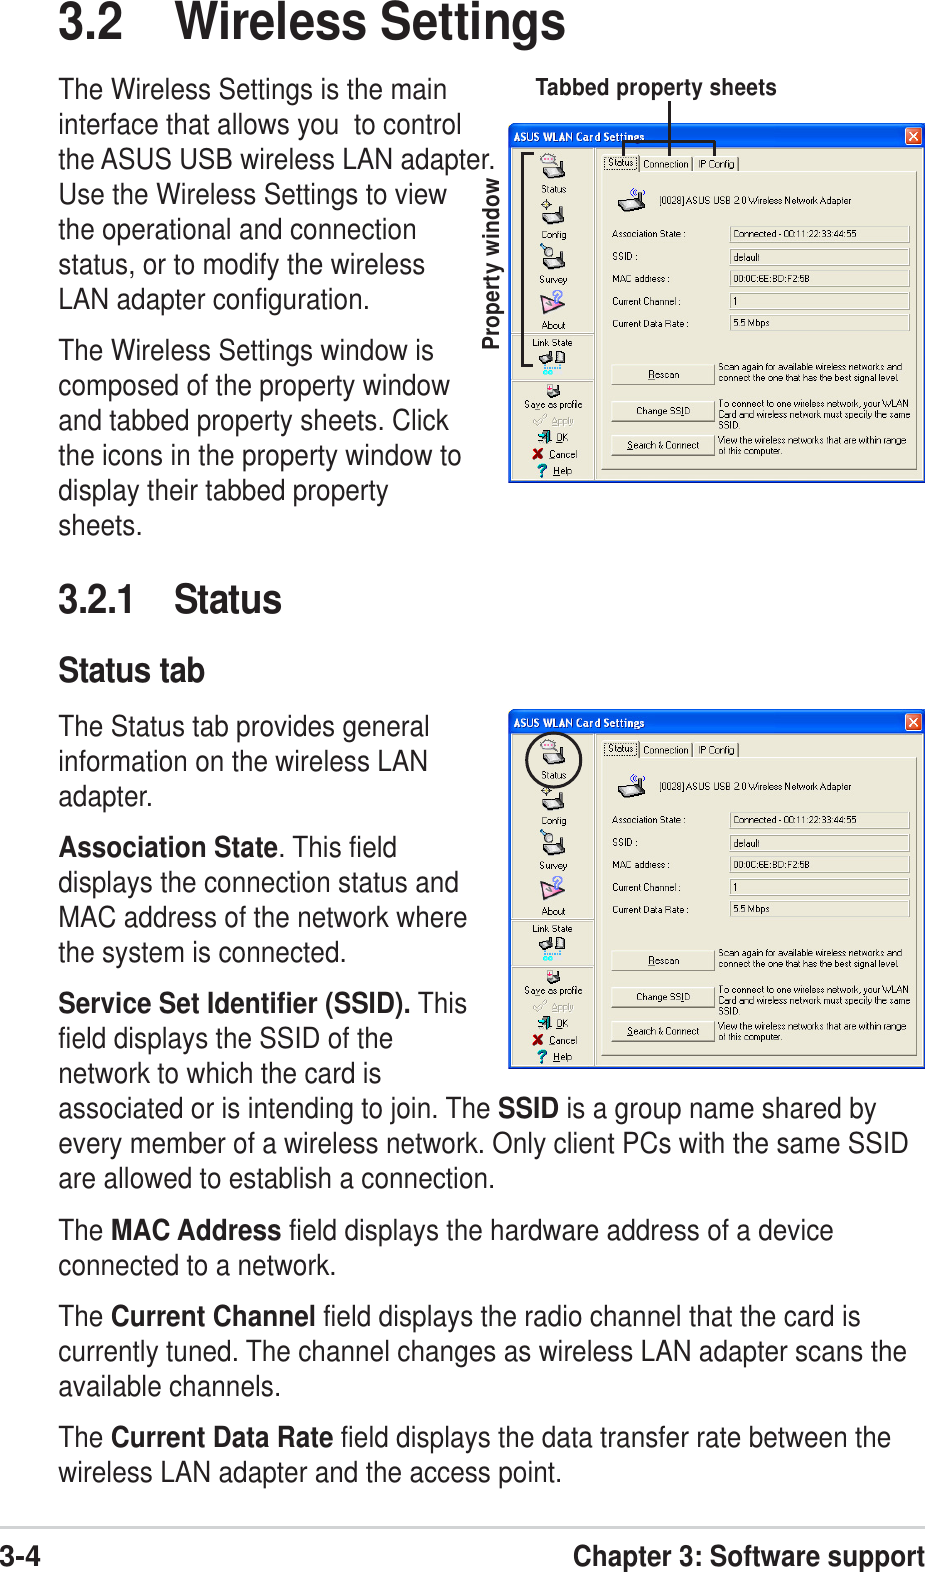 3-4Chapter 3: Software support3.2 Wireless SettingsThe Wireless Settings is the maininterface that allows you  to controlthe ASUS USB wireless LAN adapter.Use the Wireless Settings to viewthe operational and connectionstatus, or to modify the wirelessLAN adapter configuration.The Wireless Settings window iscomposed of the property windowand tabbed property sheets. Clickthe icons in the property window todisplay their tabbed propertysheets.Property windowTabbed property sheets3.2.1 StatusStatus tabThe Status tab provides generalinformation on the wireless LANadapter.Association State. This fielddisplays the connection status andMAC address of the network wherethe system is connected.Service Set Identifier (SSID). Thisfield displays the SSID of thenetwork to which the card isassociated or is intending to join. The SSID is a group name shared byevery member of a wireless network. Only client PCs with the same SSIDare allowed to establish a connection.The MAC Address field displays the hardware address of a deviceconnected to a network.The Current Channel field displays the radio channel that the card iscurrently tuned. The channel changes as wireless LAN adapter scans theavailable channels.The Current Data Rate field displays the data transfer rate between thewireless LAN adapter and the access point.